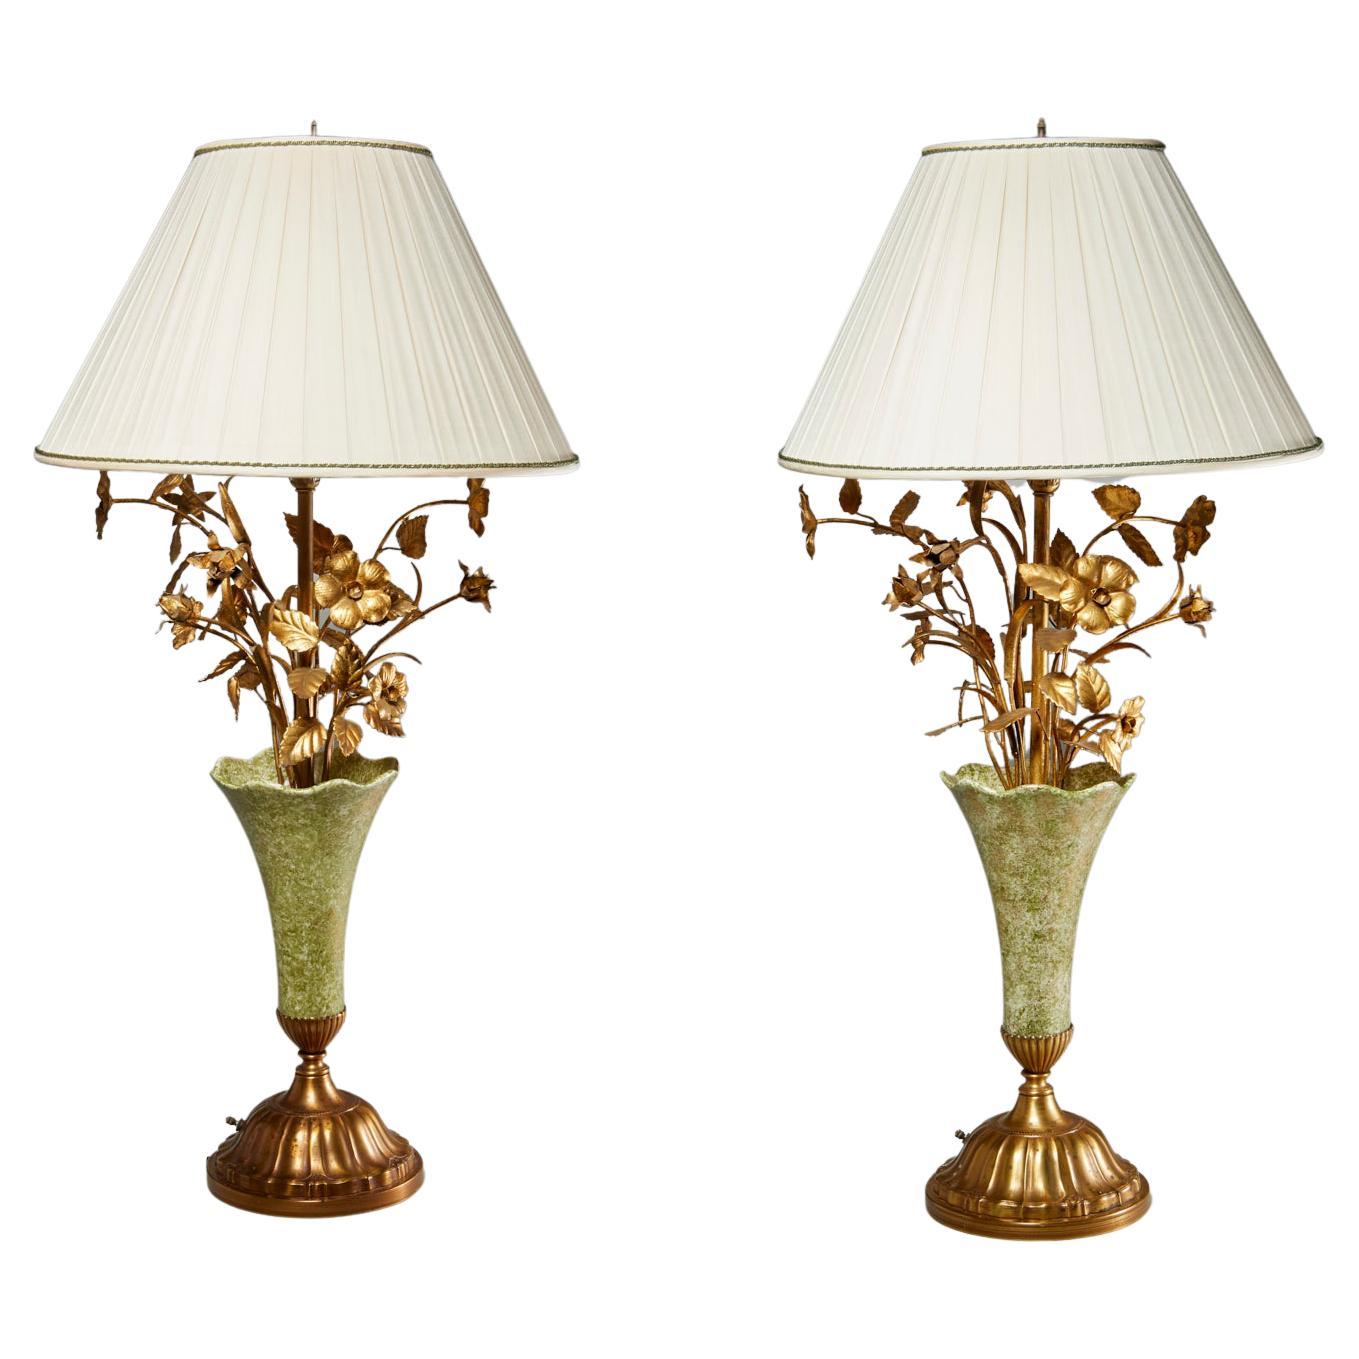 Pair of 1960's Italian Gilt Tole and Ceramic Floral Bouquet Table Lamps